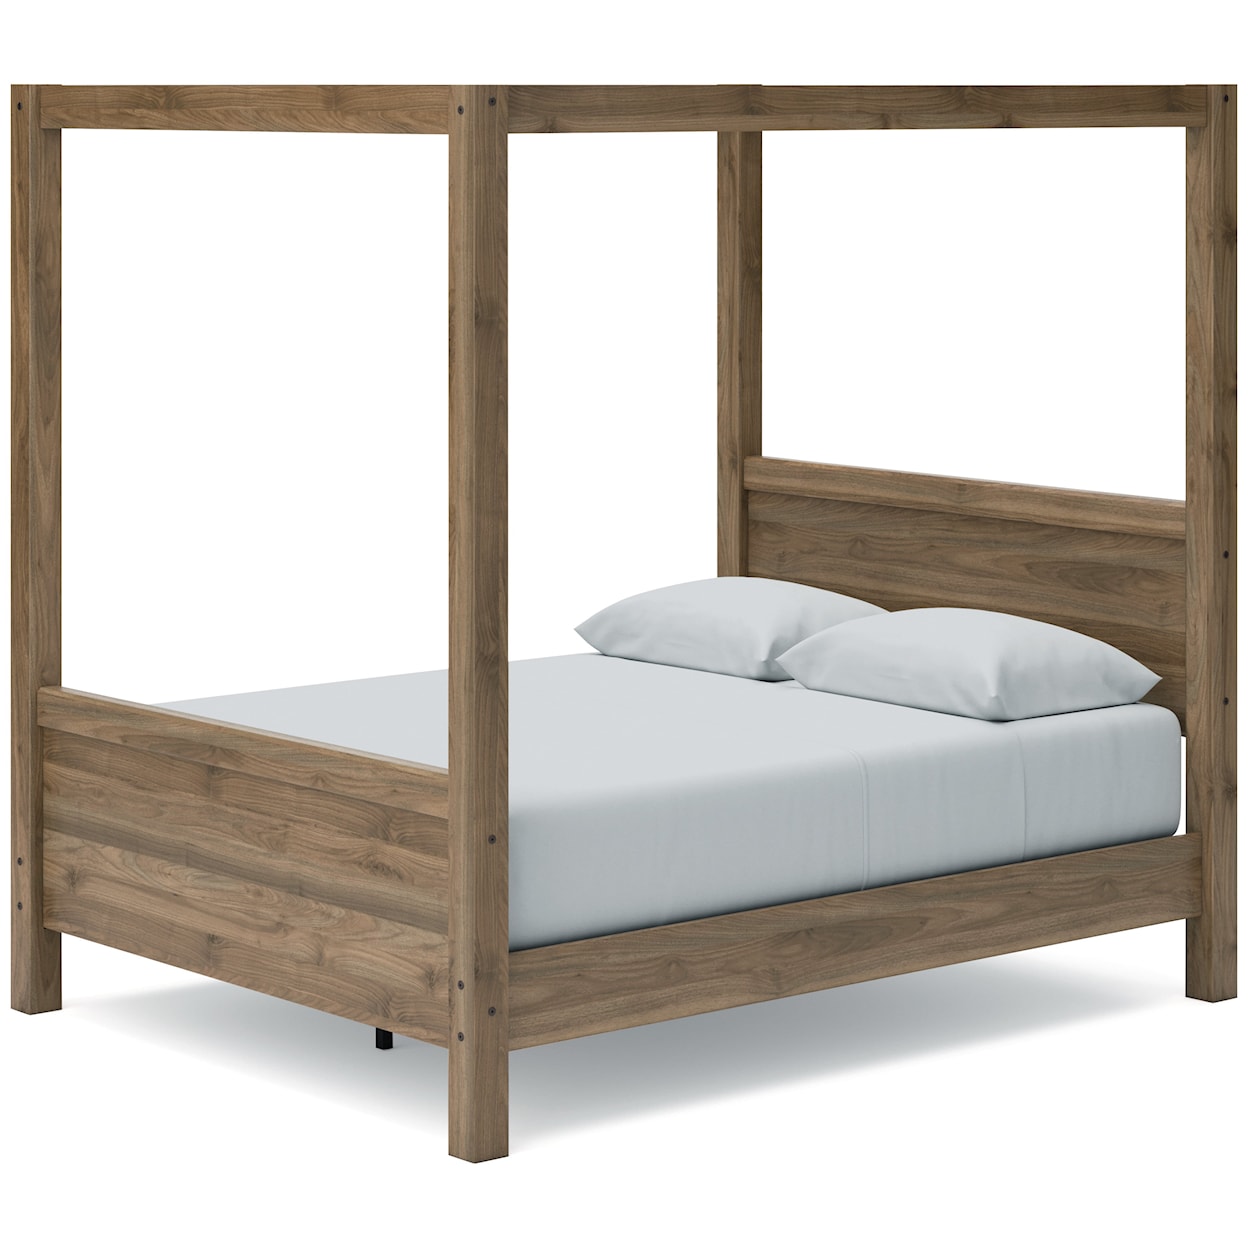 Benchcraft Aprilyn Queen Canopy Bed